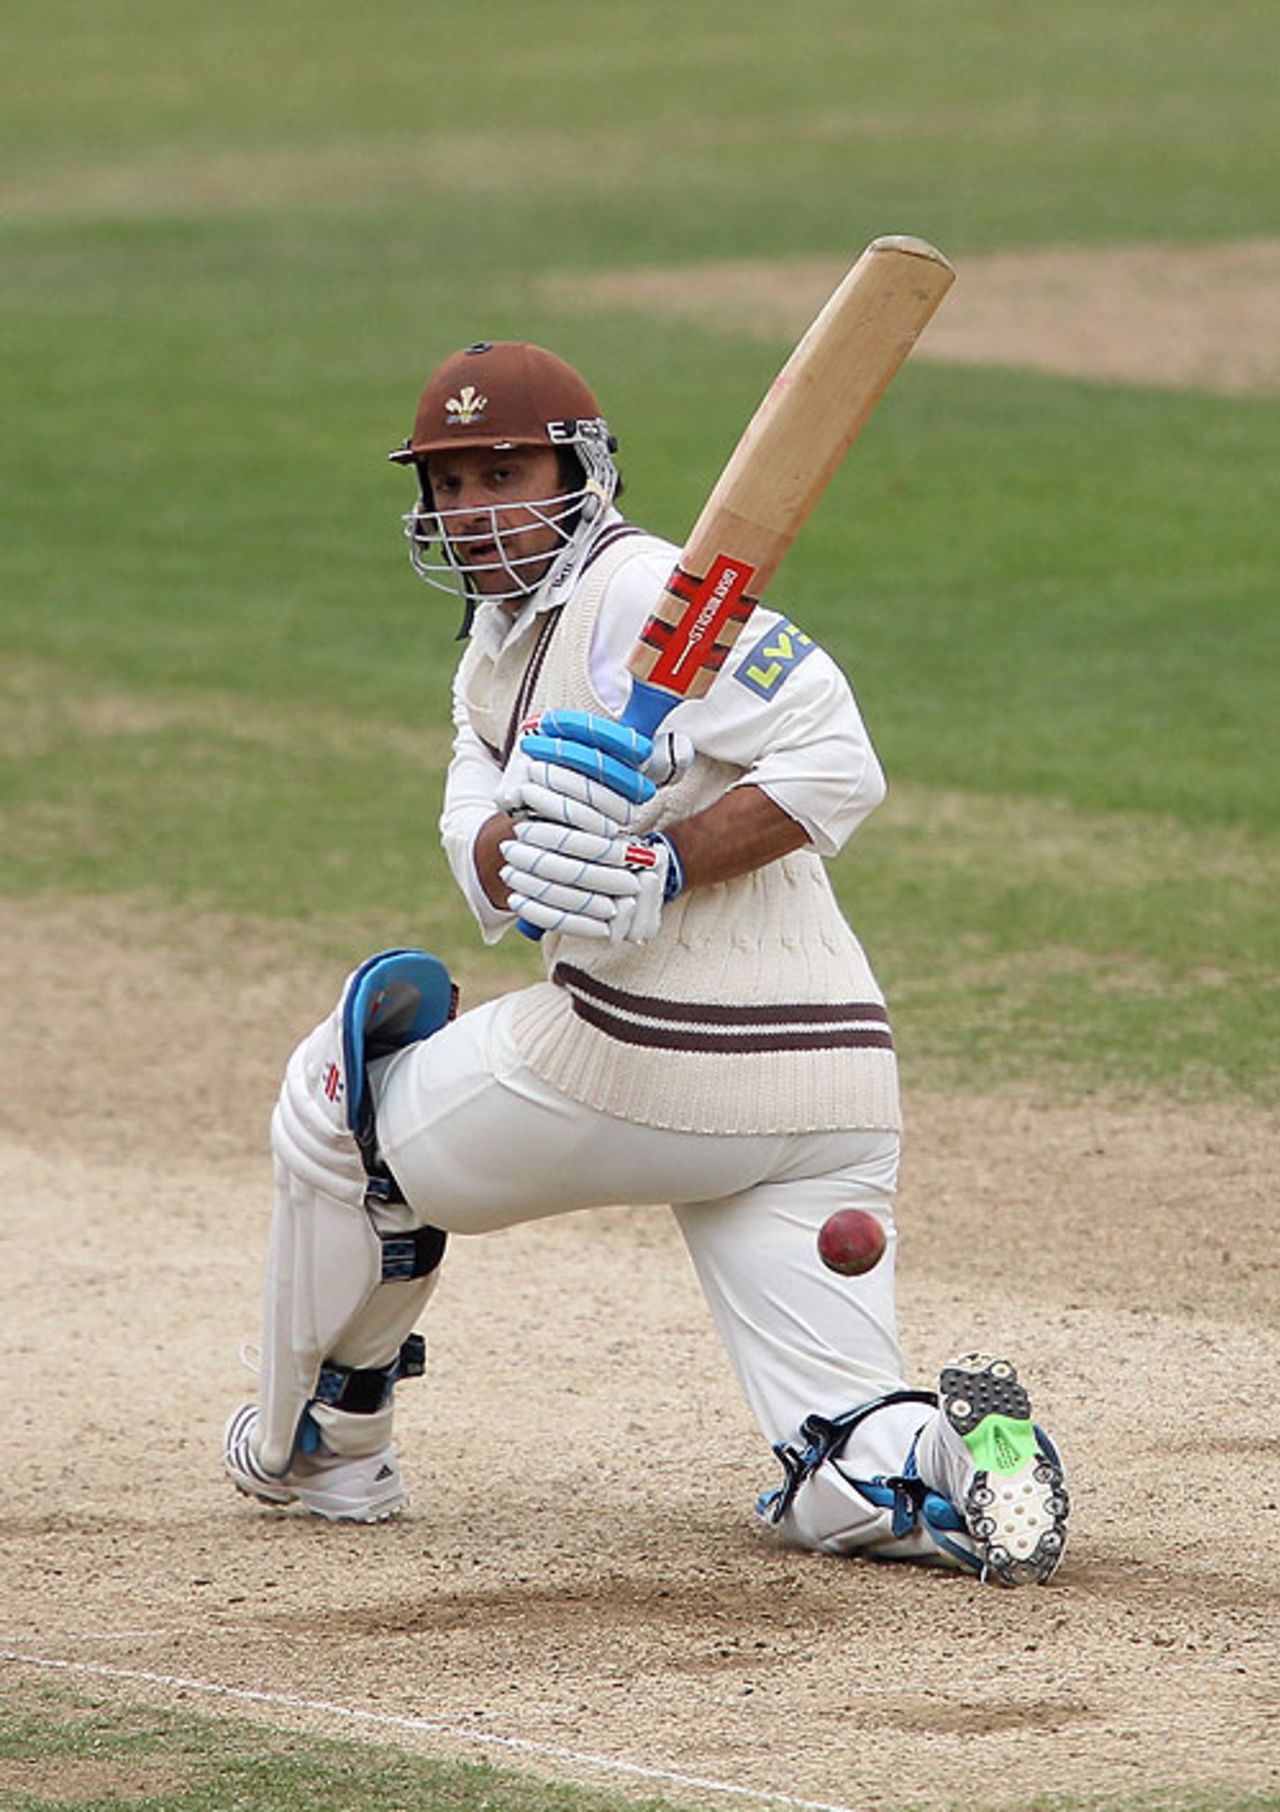 Mark Ramprakash sweeps en route to a double-century, Surrey v Middlesex, 2nd day, The Oval, May 18, 2010